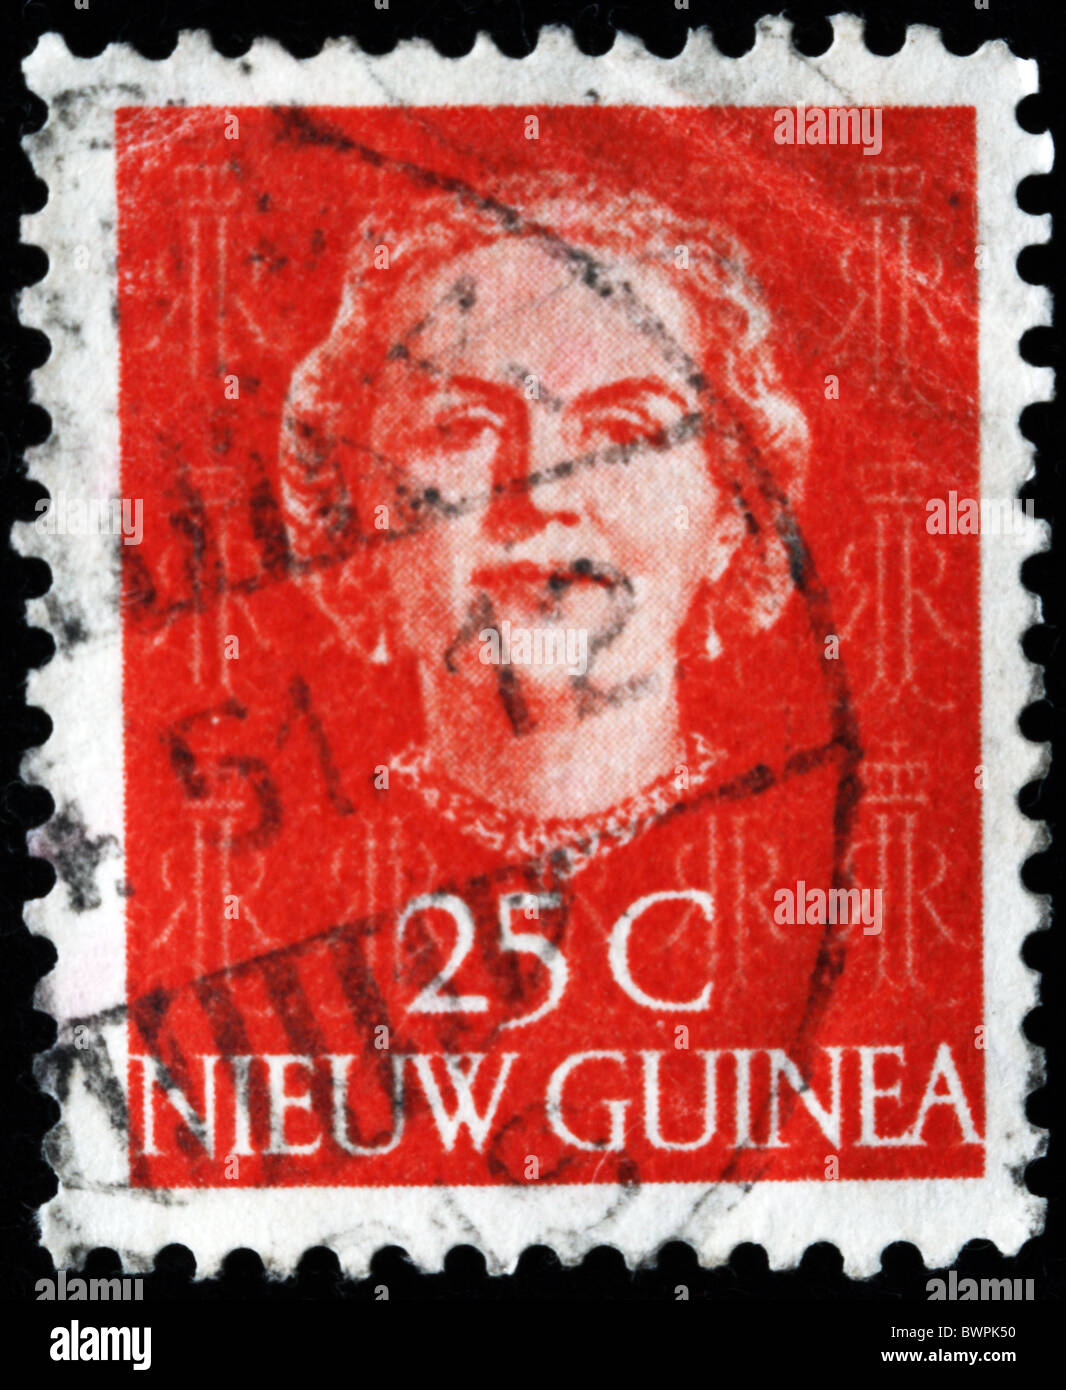 NEW GUINEA - CIRCA 1953: A stamp printed in New Guinea shows image of Queen Juliana, series, circa 1953 Stock Photo